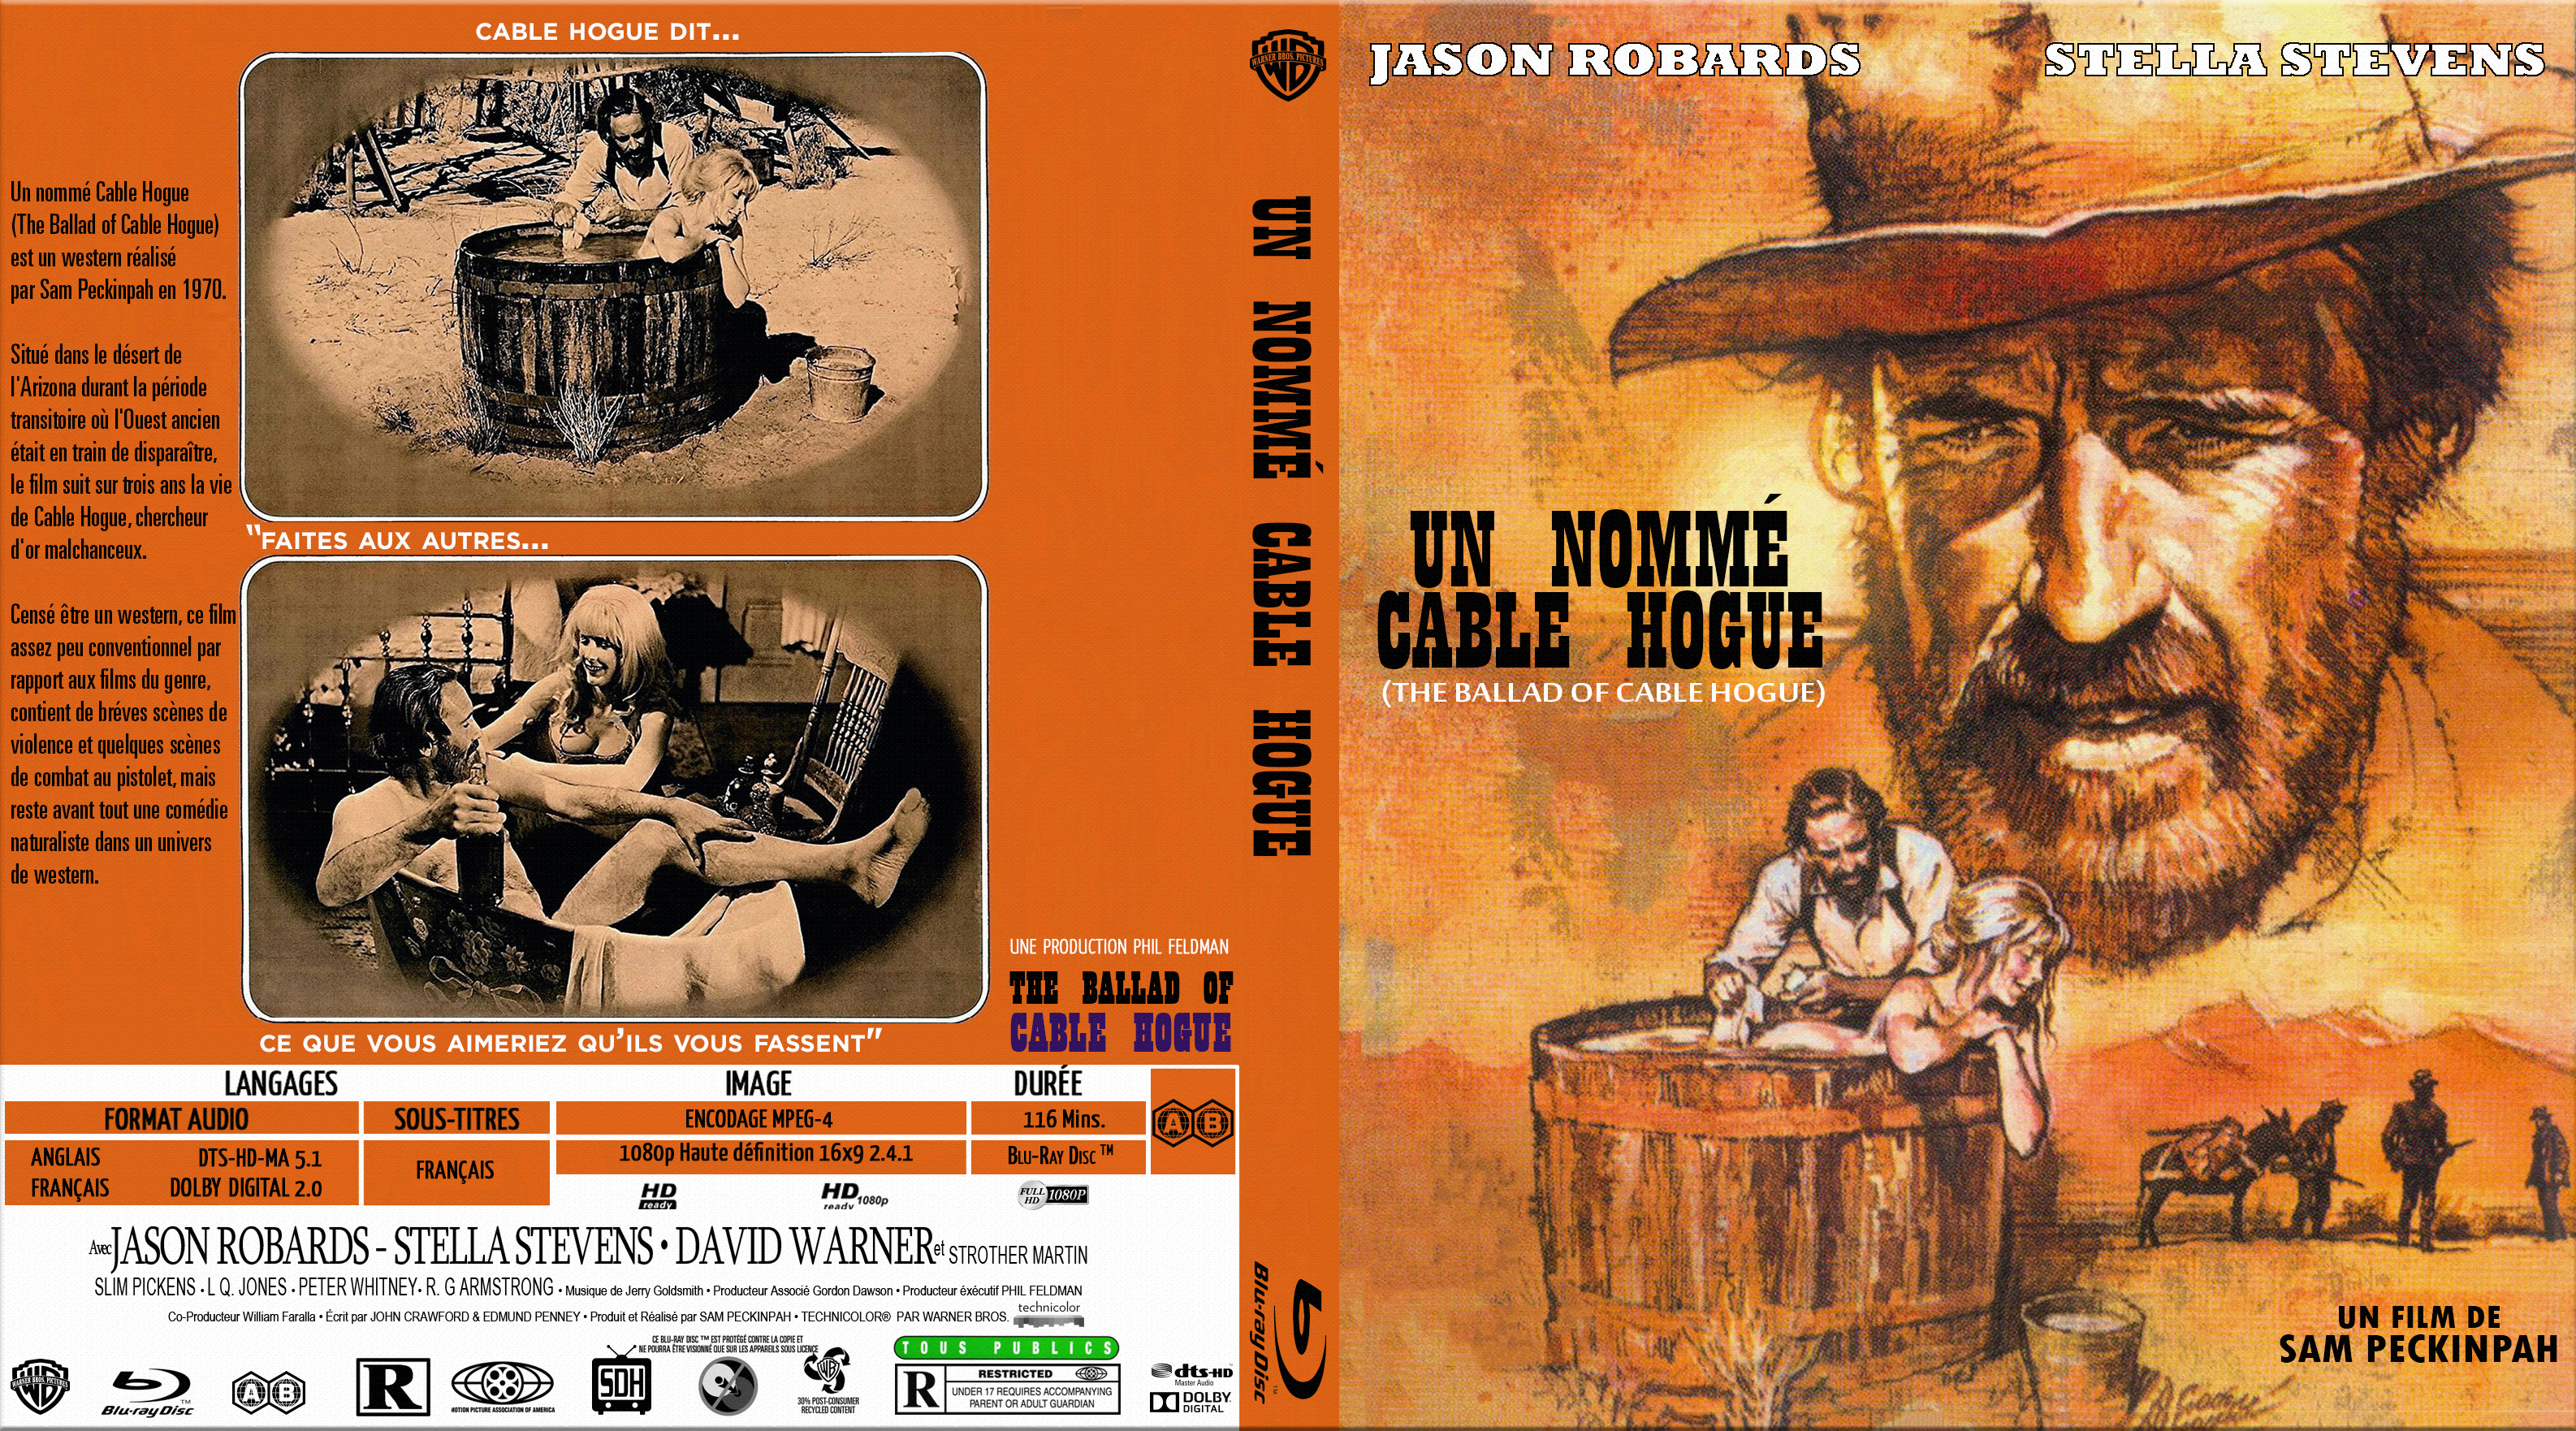 Jaquette DVD Un nomm Cable Hogue custom (BLU-RAY)